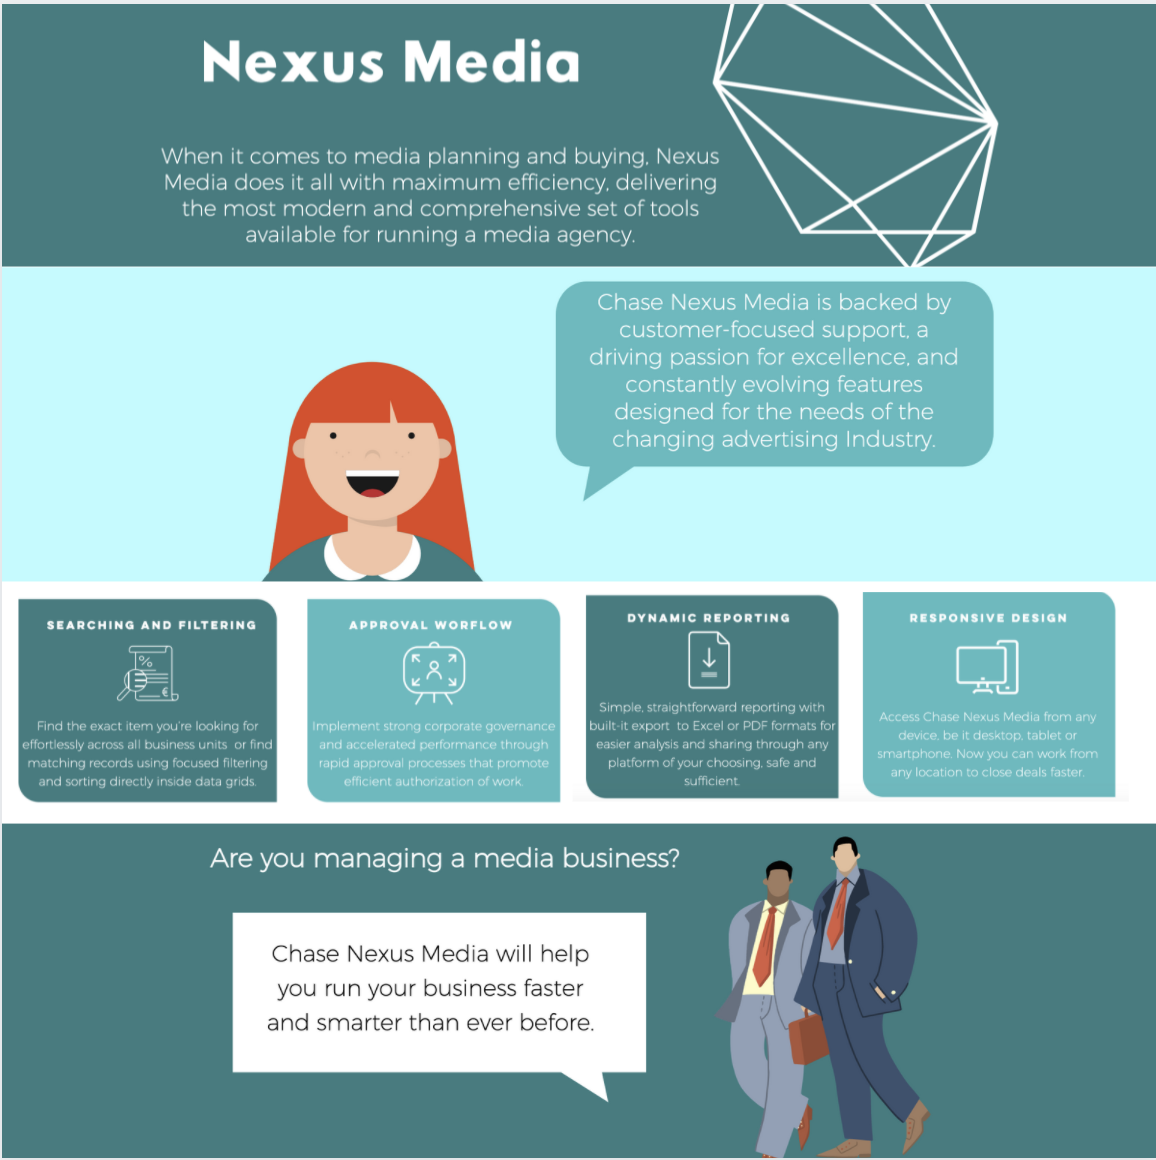 Chase Nexus Media - When it comes to media planning and buying, Nexus Media does it all with maximum efficiency, delivering the most modern and comprehensive set of tools available for running a media agency.